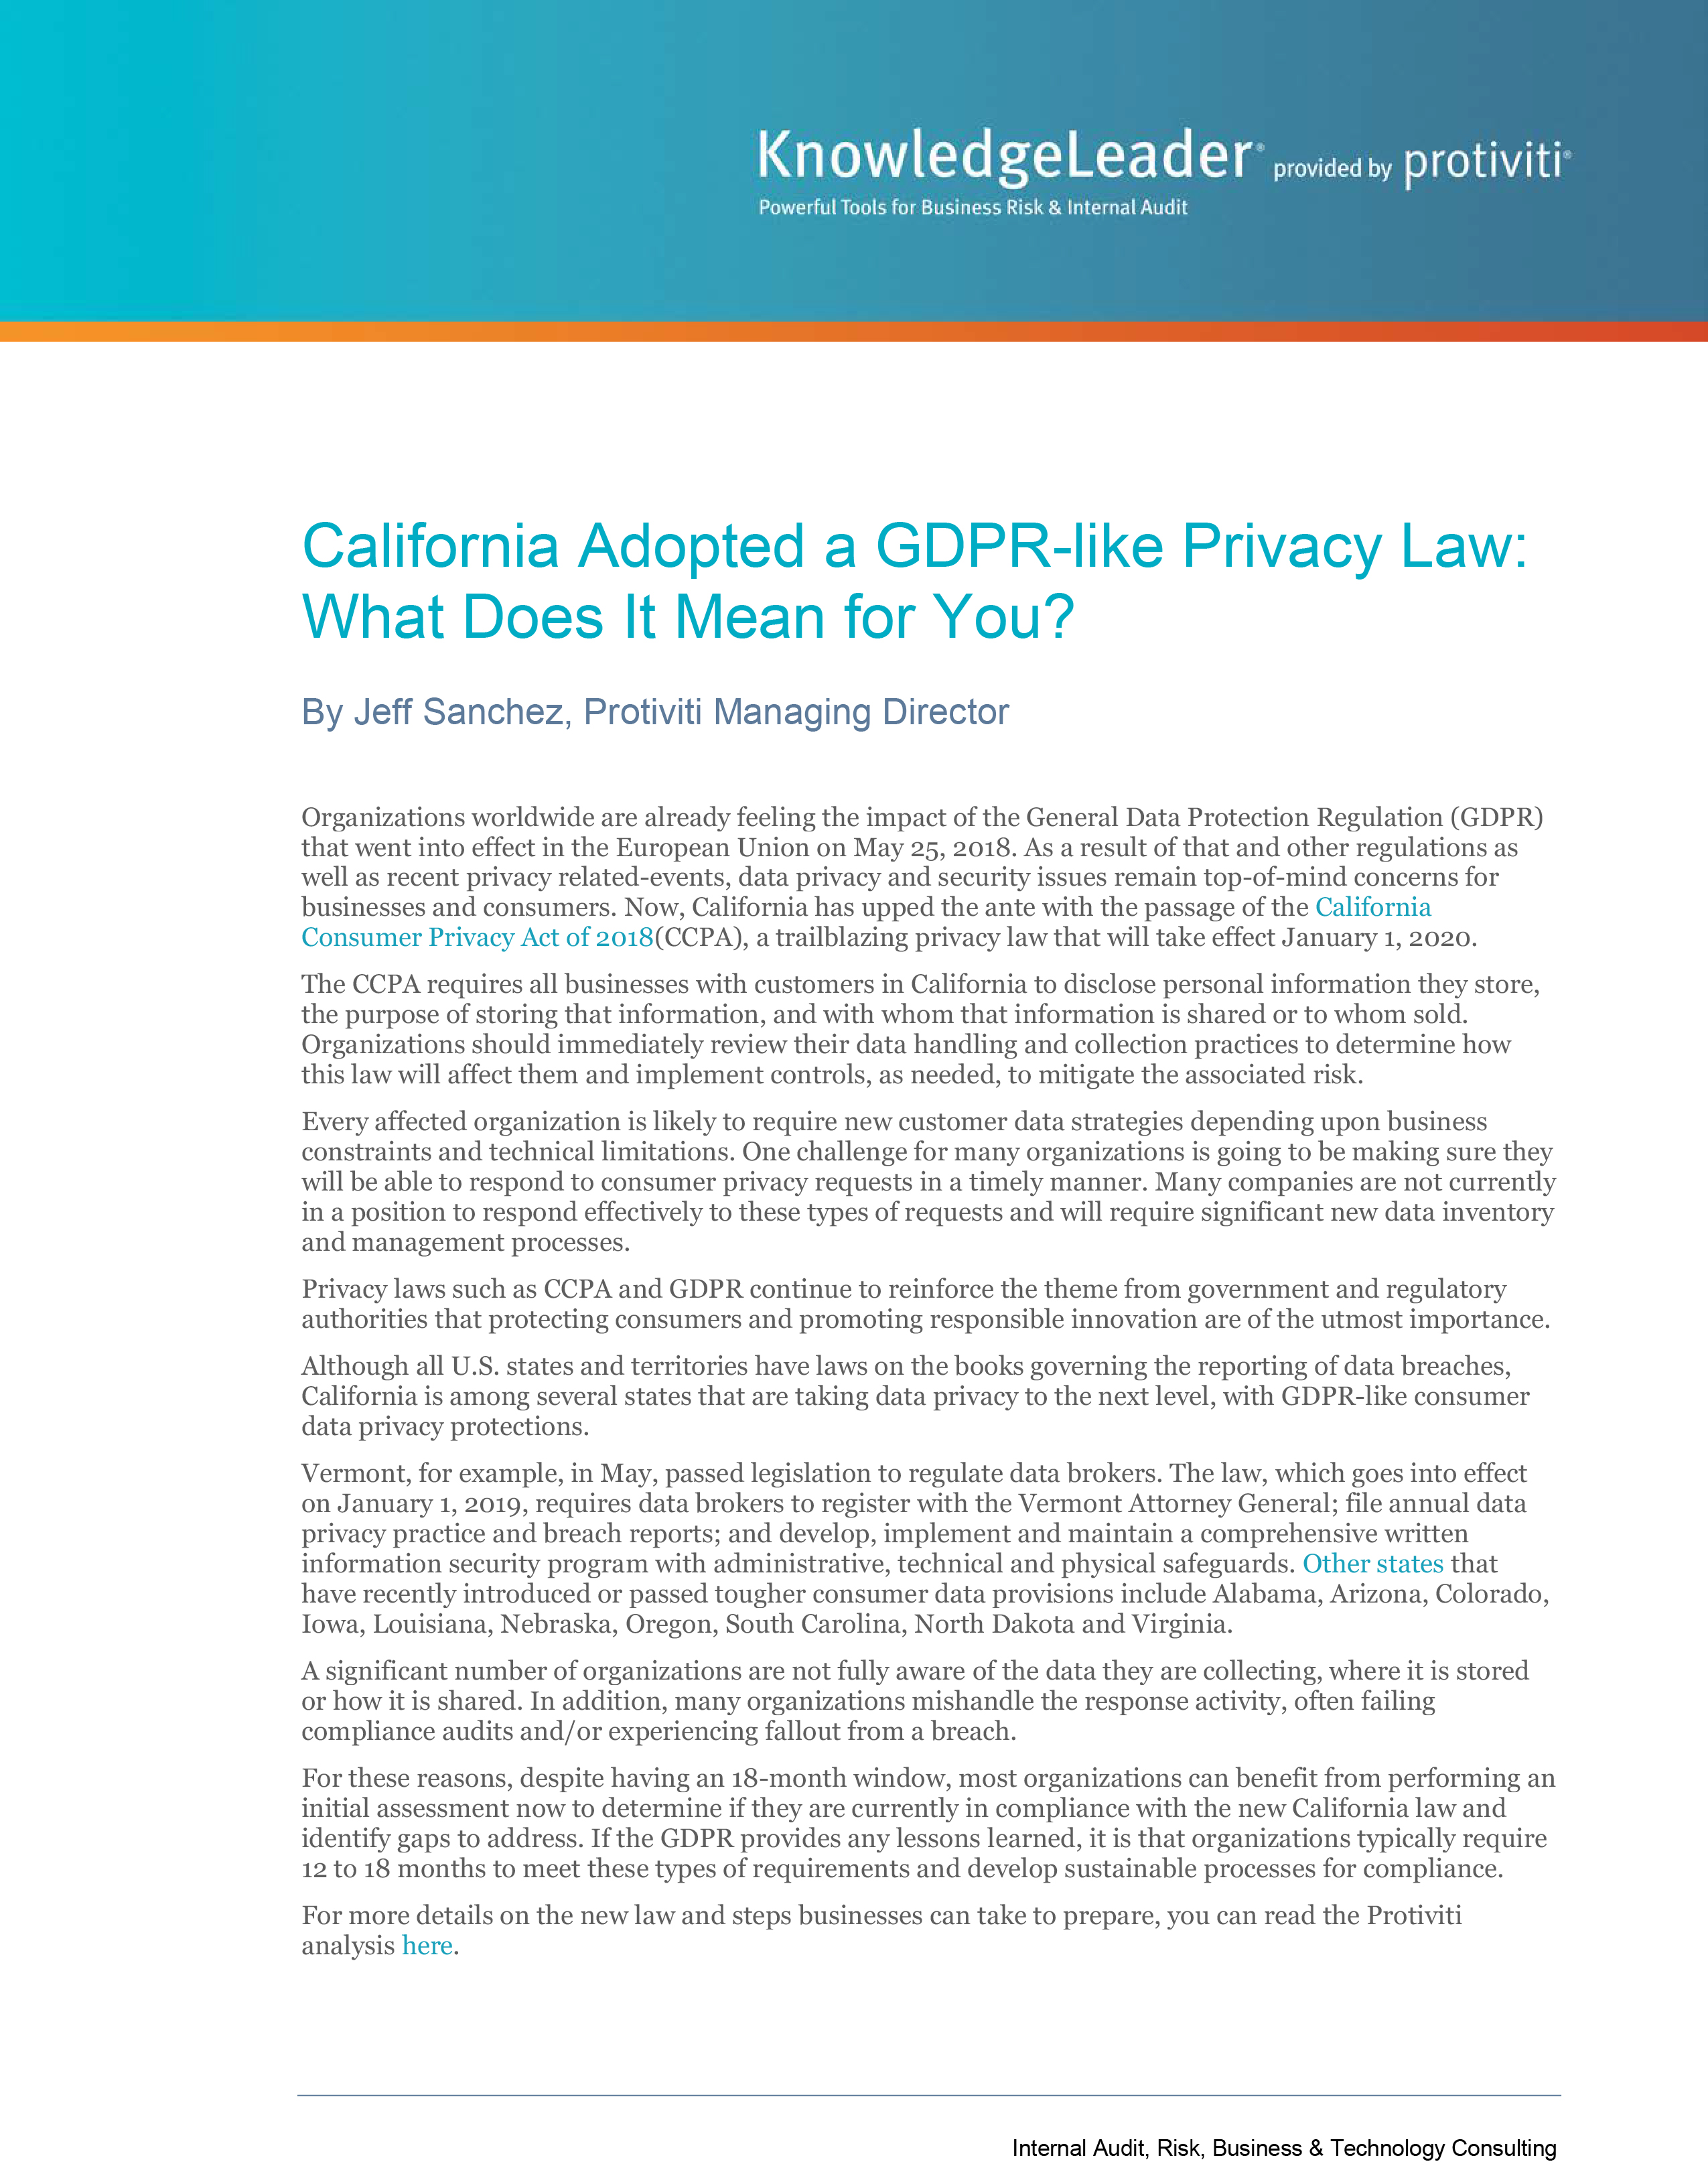 Screenshot of the first page of California Adopted a GDPR-like Privacy Law: What Does It Mean for You?